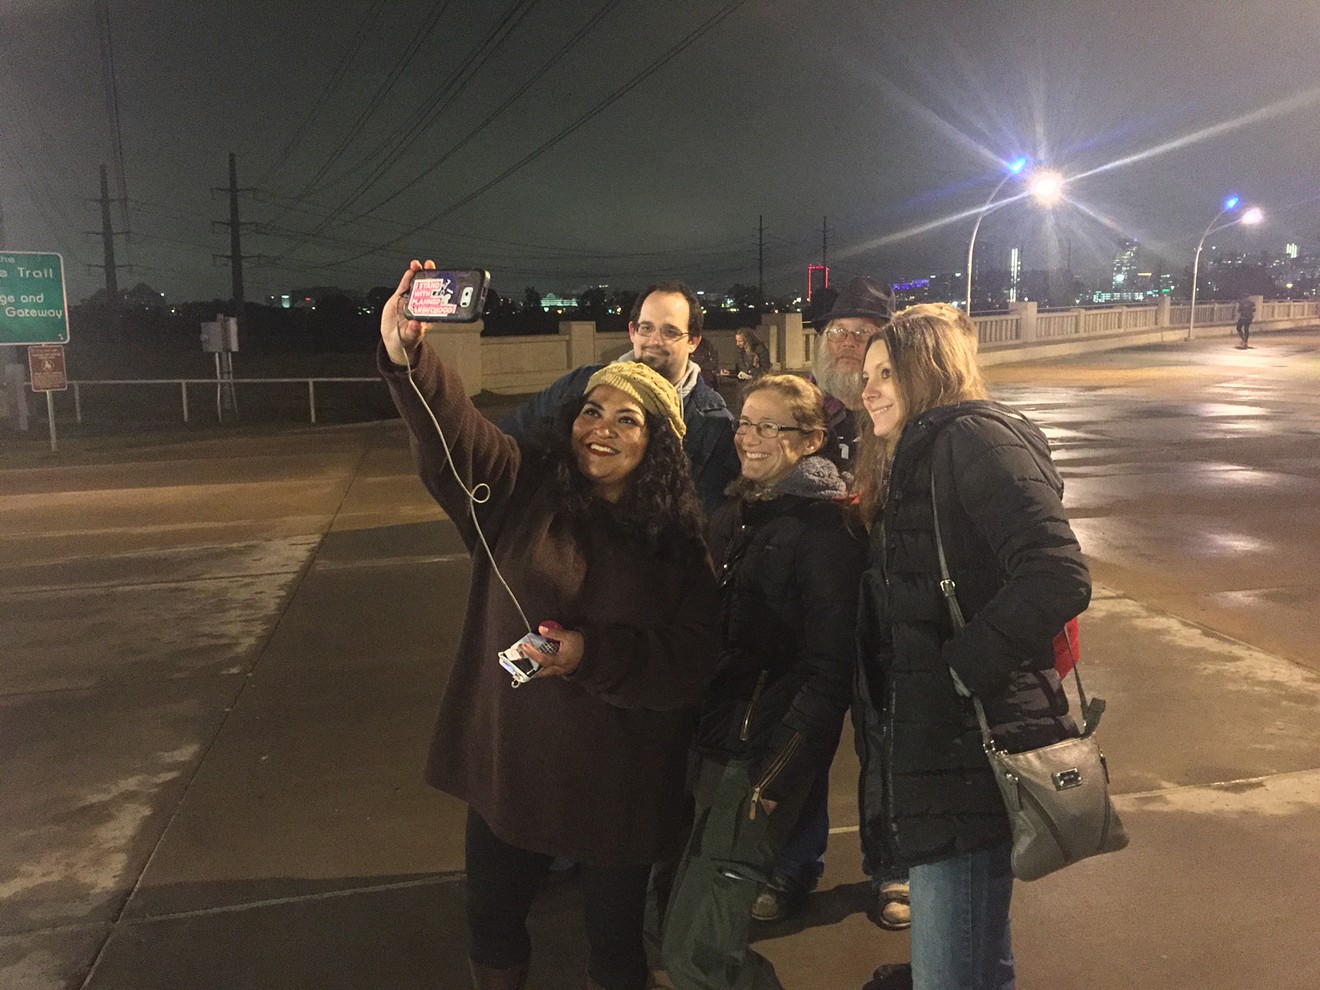 Soraya Colli of Dallas, the organizer of Wednesday night's event, takes a selfie of the group. The counterprotester, Zach, is top left.